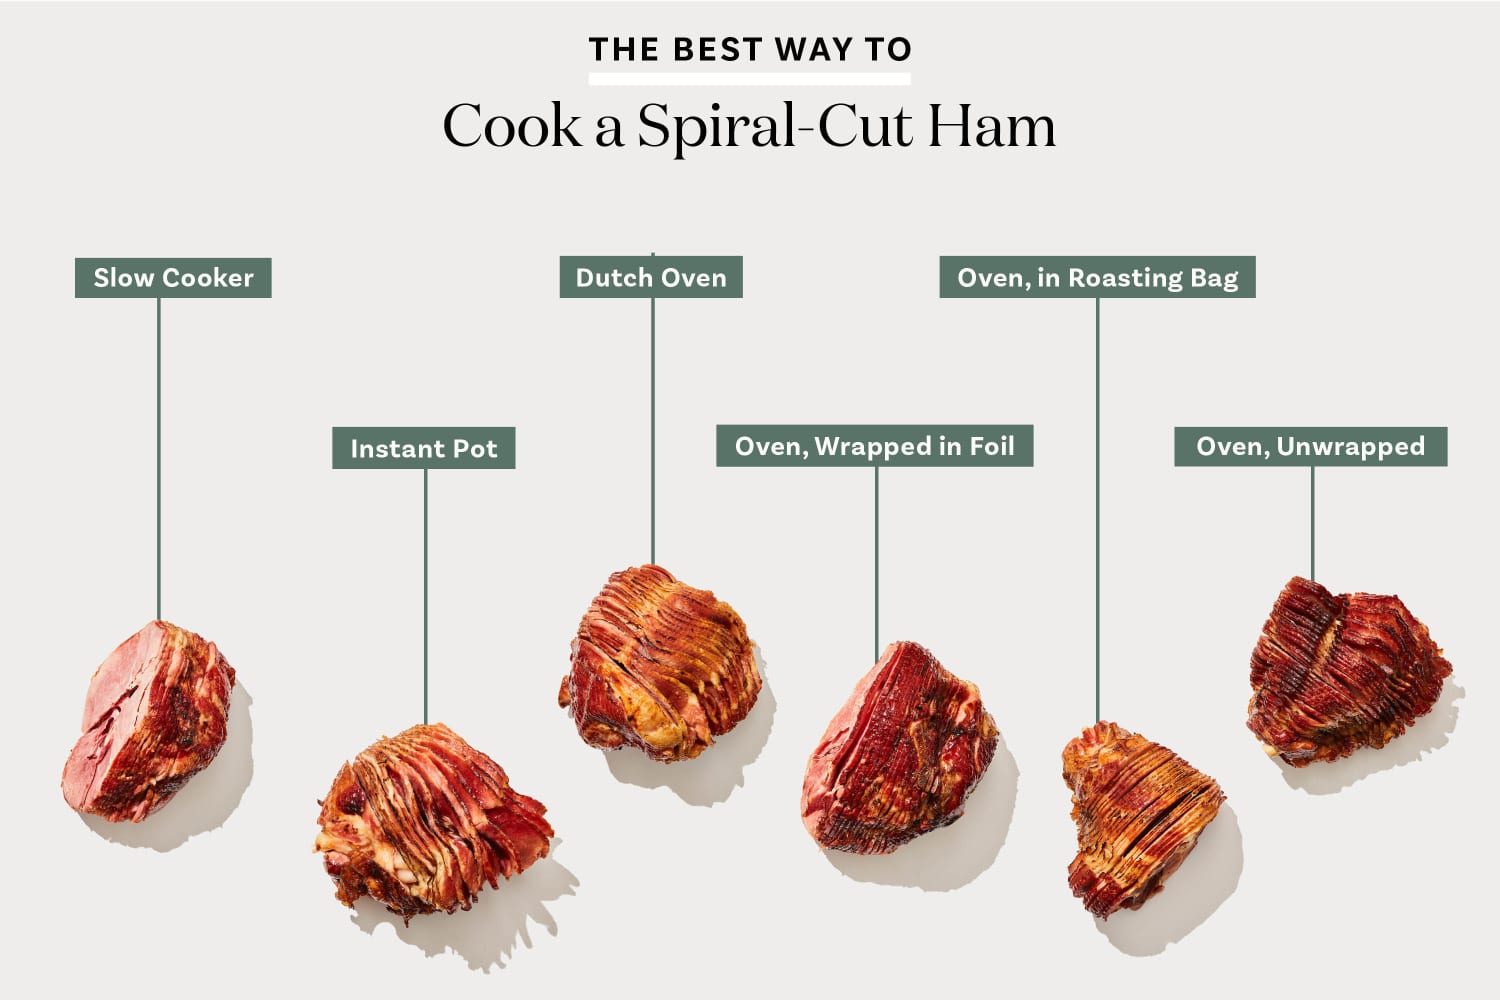 We Tried 6 Ways of Cooking Spiral-Cut Ham and the Winner Was a Juicy, Flavorful Showstopper